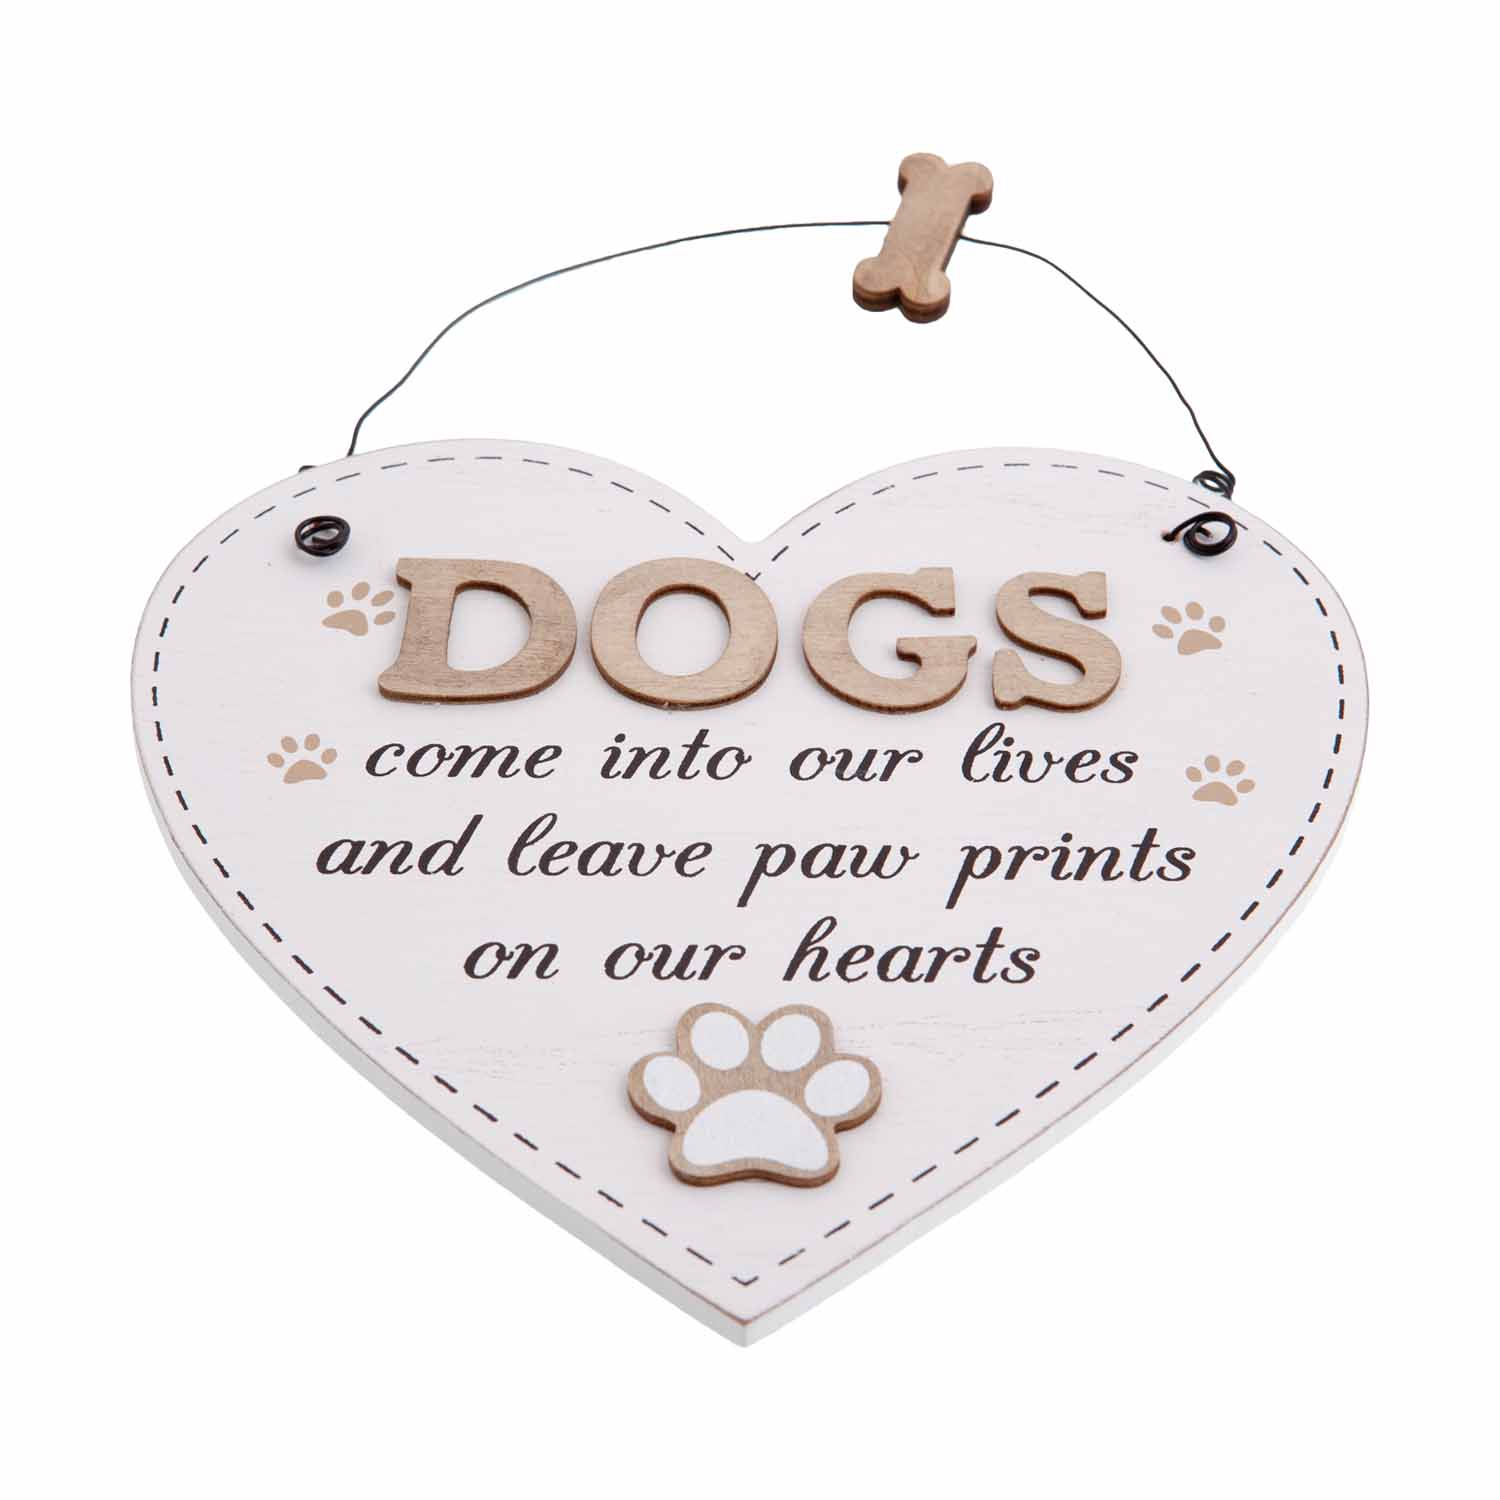 Dog Krazy Gifts - Dogs Come Into Our Lives Large Heart Sign, Part Of The Wide Range of Dog Signs available from DogKrazyGifts.co.uk